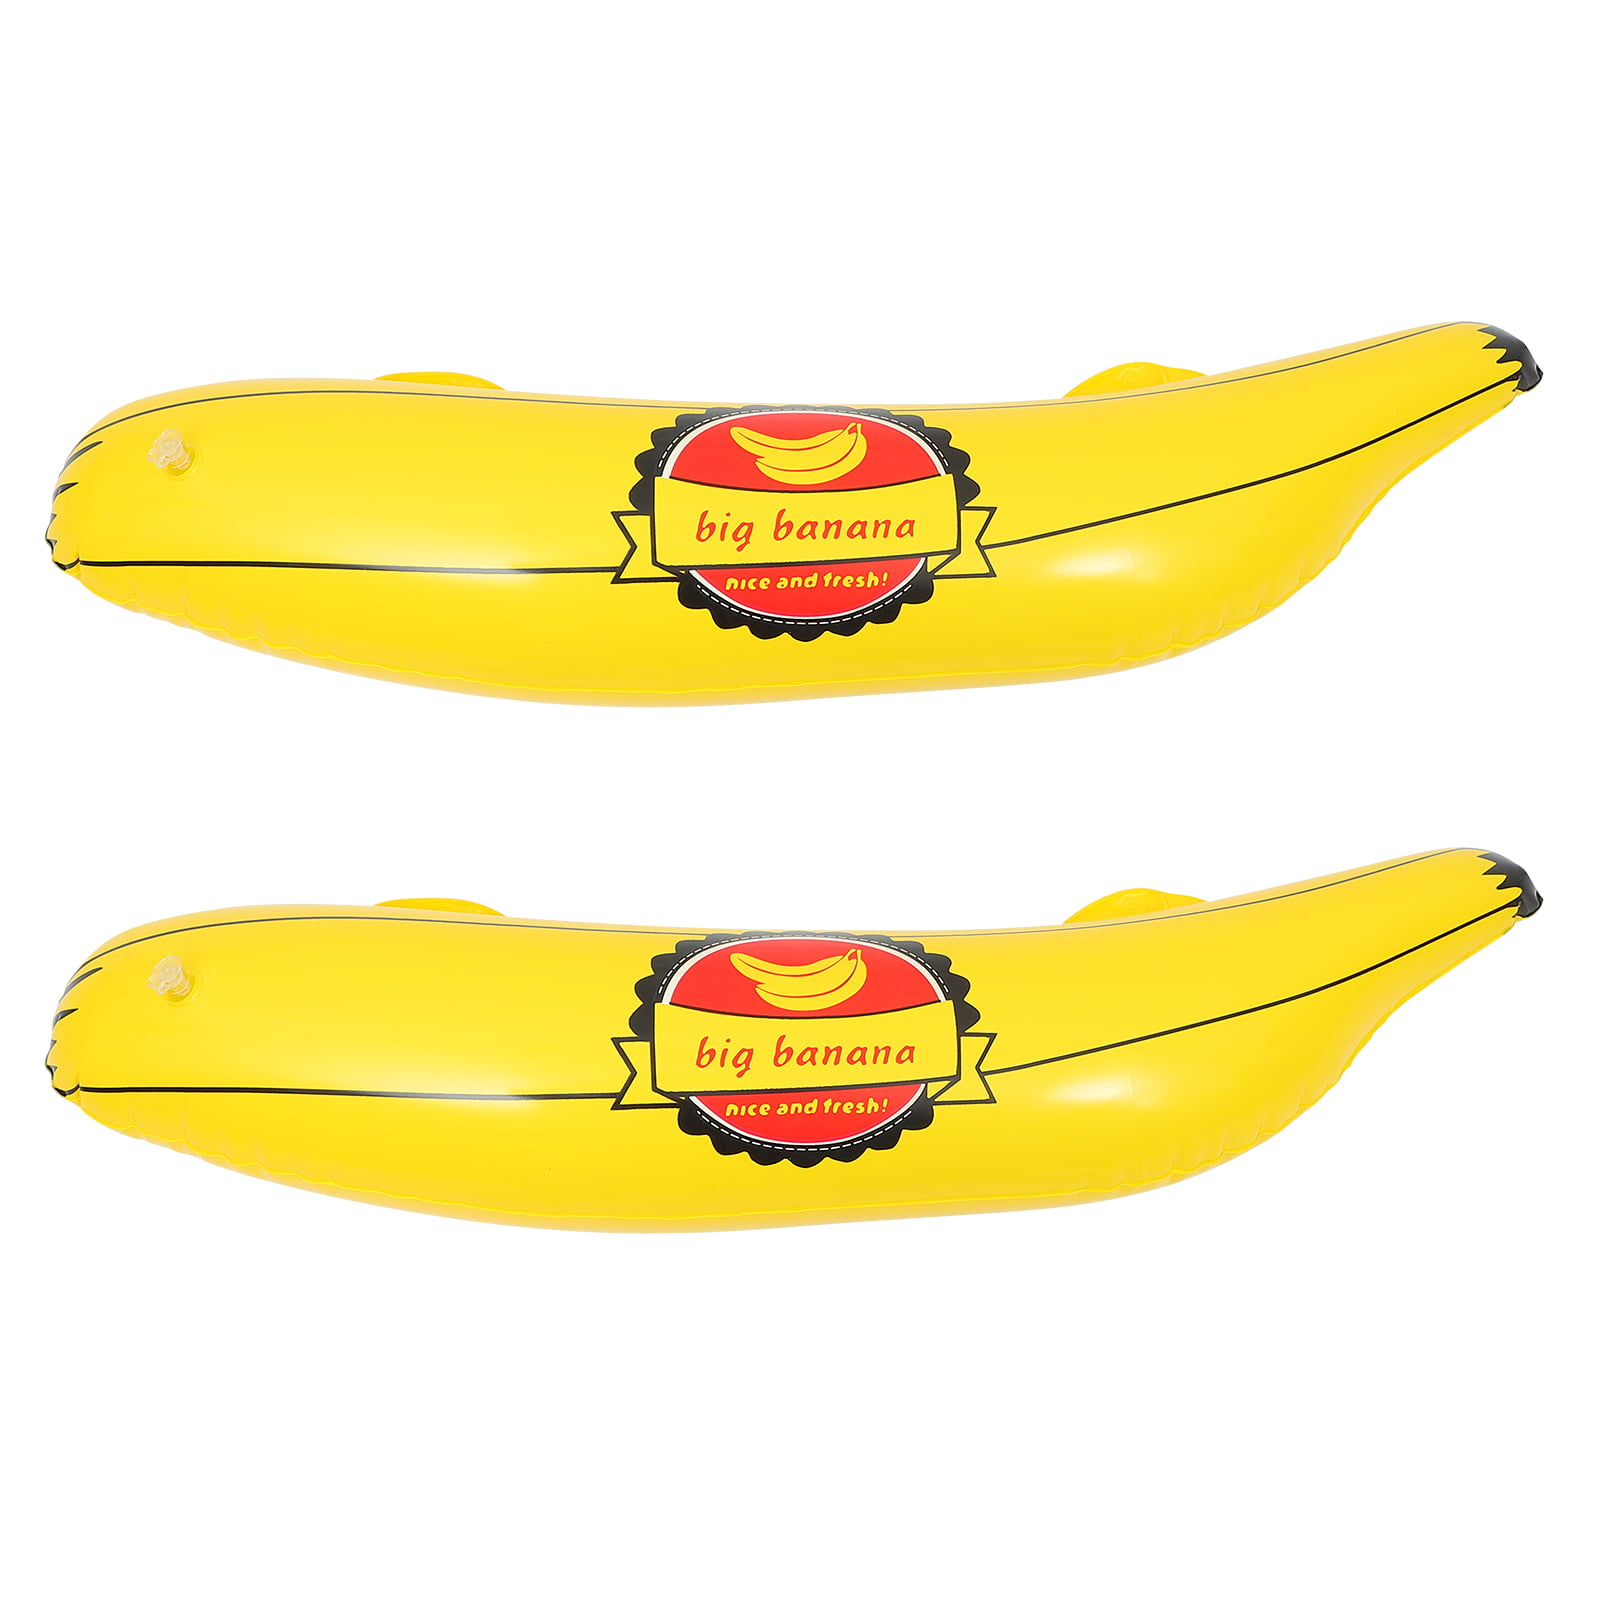 4 HUGE JUMBO SIZE INFLATE BANANA novelty blowup bananna inflatable toy new 28 IN 